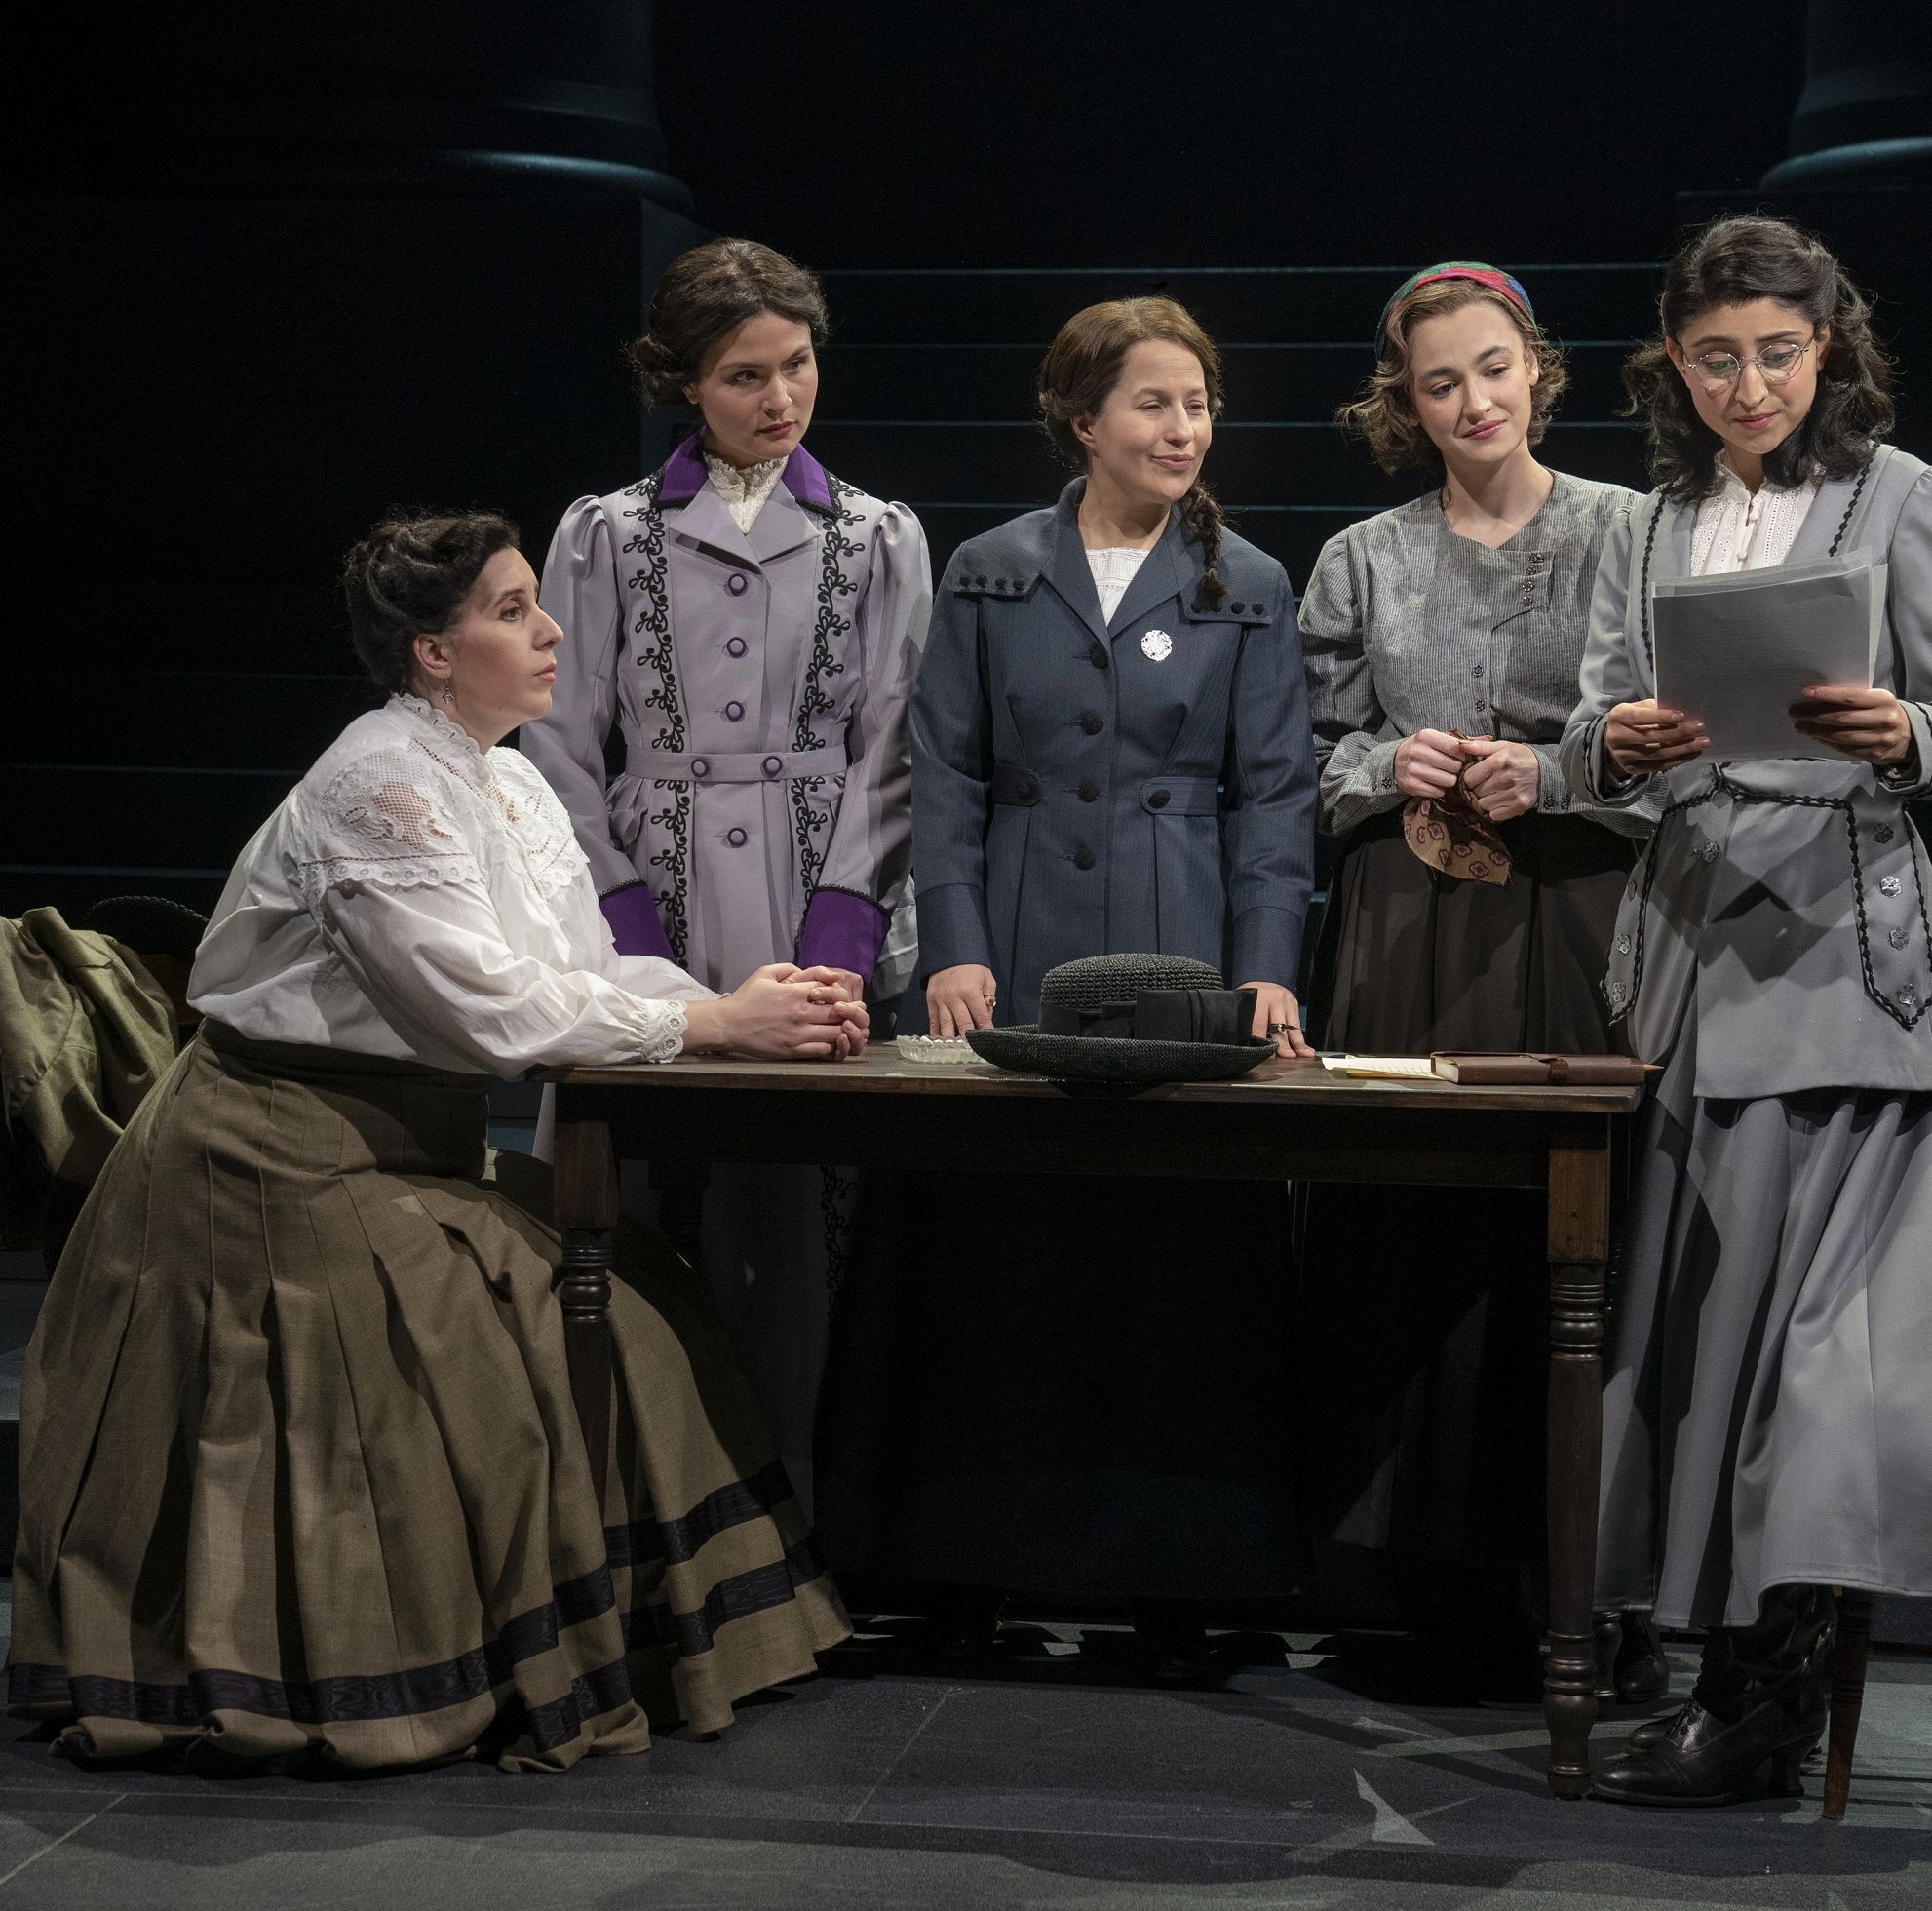 The Public Theater's buzzy musical about the women's suffrage movement is coming to an end—right when we need it most.